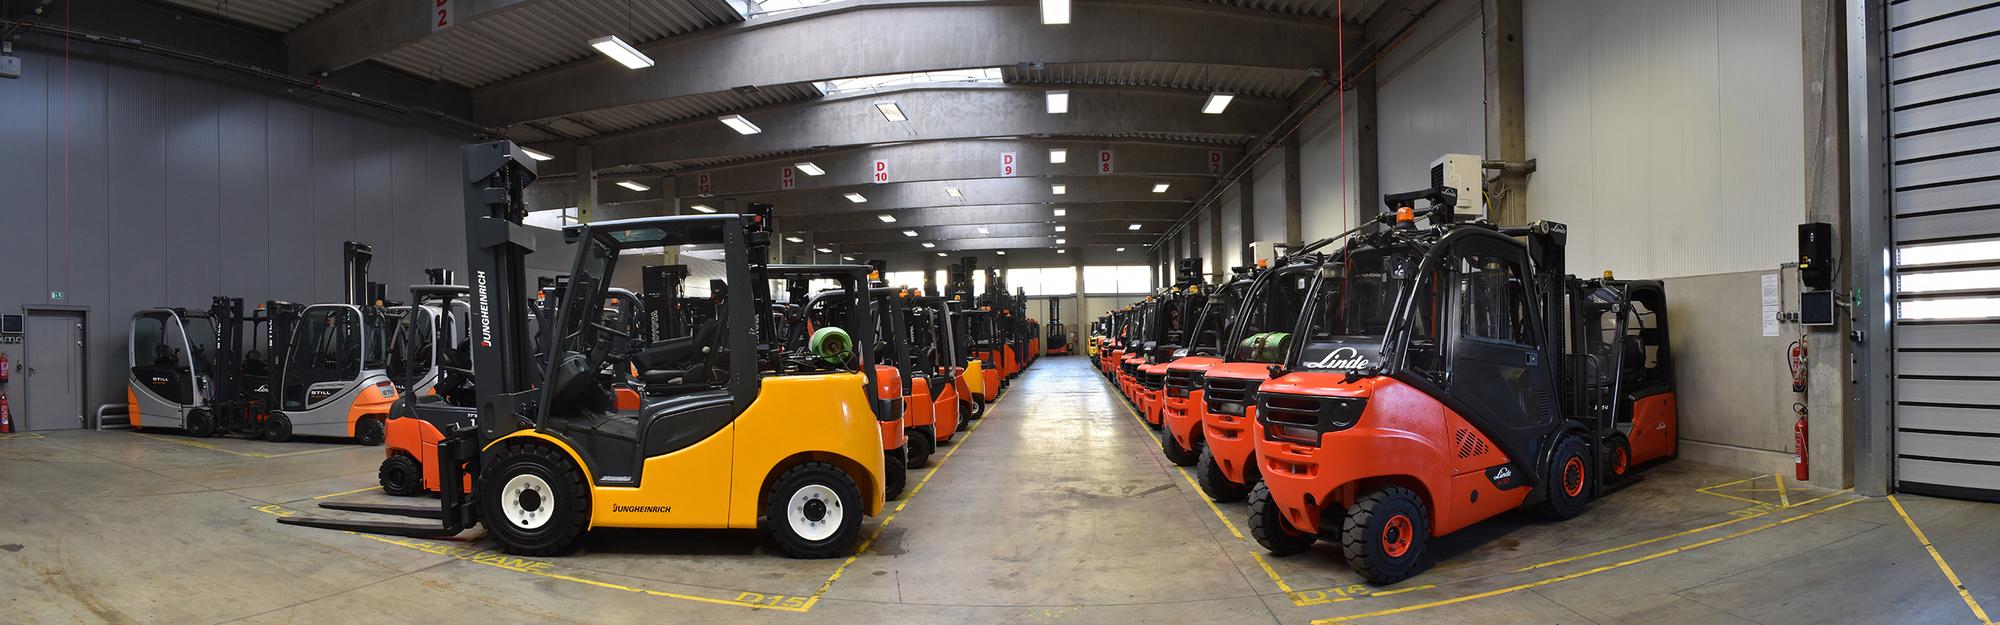 CHUF – cheap used forklifts - Matériels de manutention undefined: photos 2